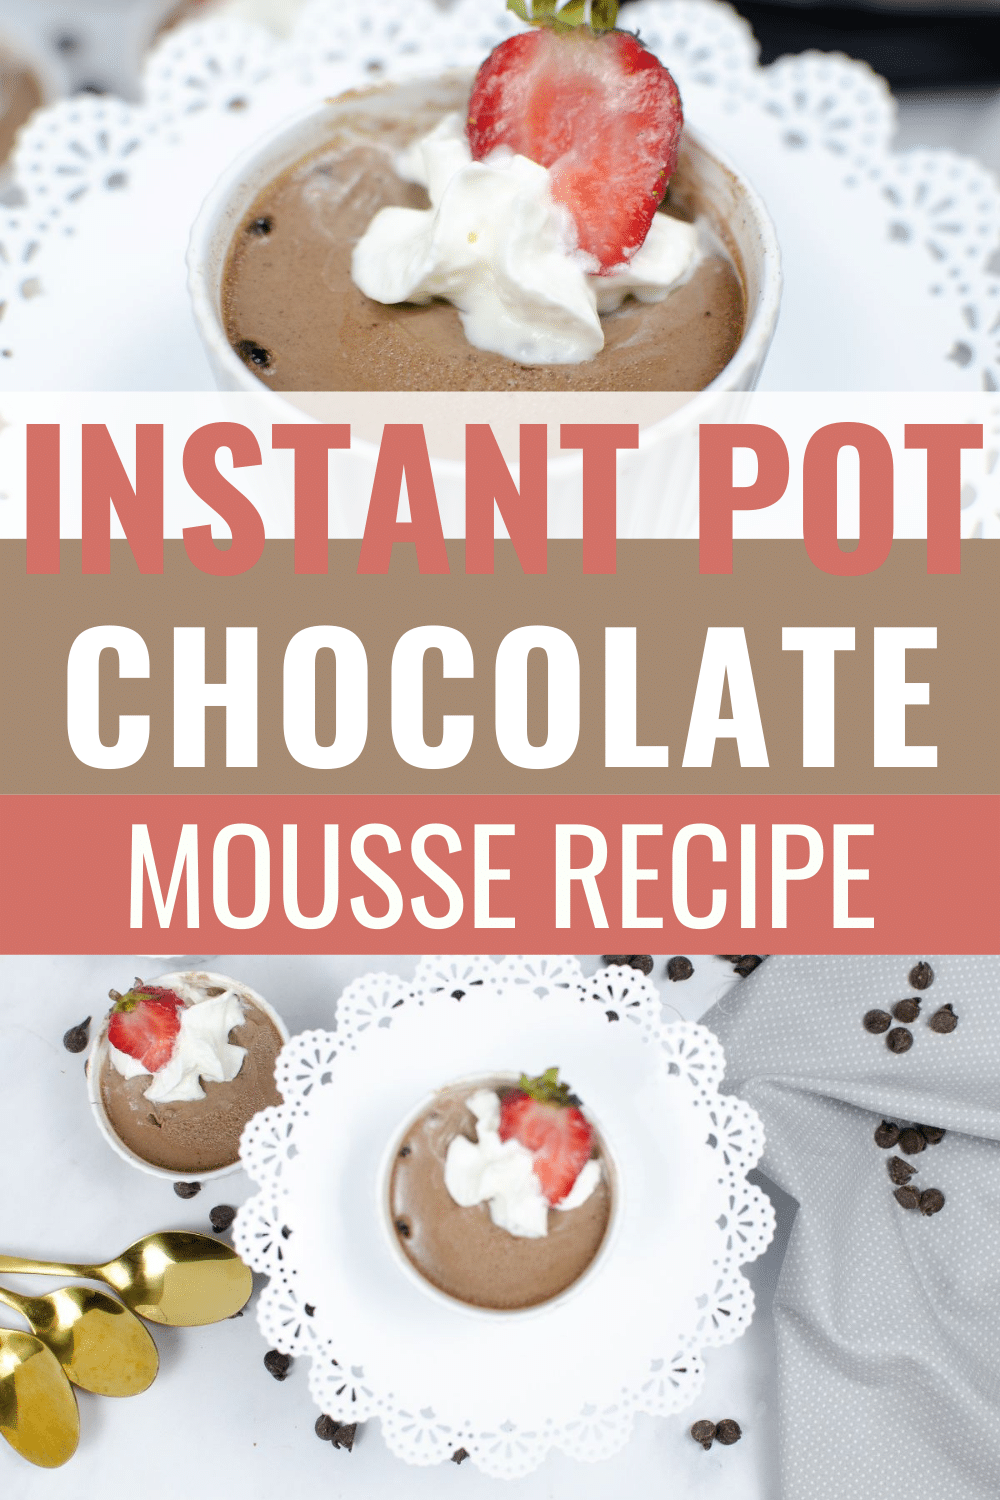 A collage of two images of Instant Pot Chocolate Mousse with a large text in between them saying "Instant Pot Chocolate Mousse Recipe"